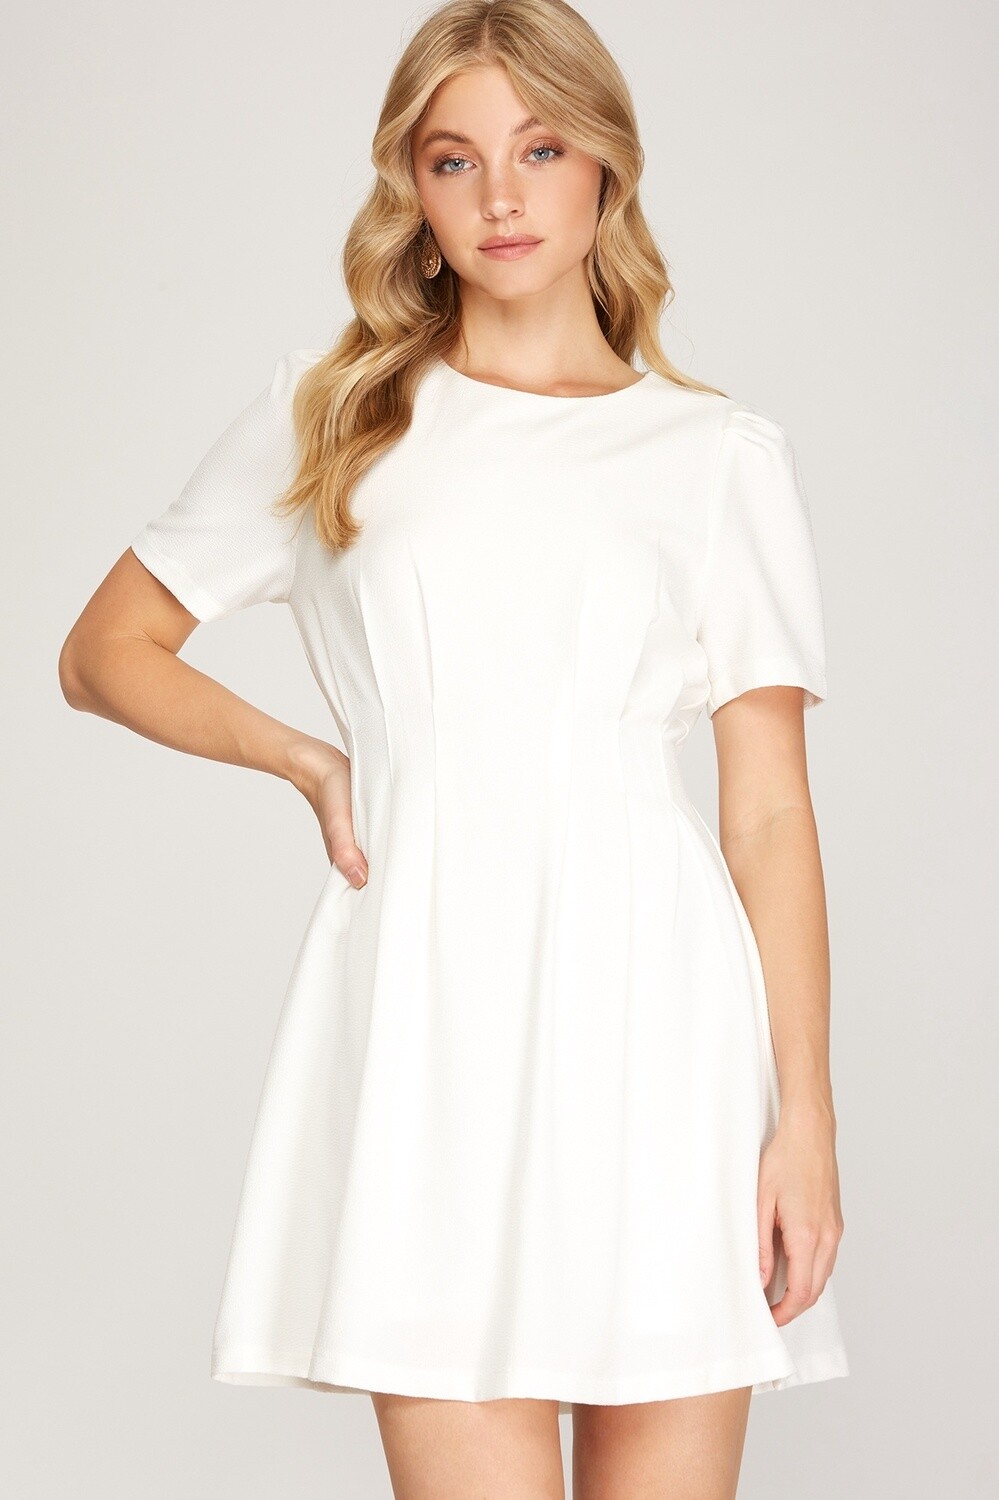 Pin Tuck Short Sleeve Dress in Off White